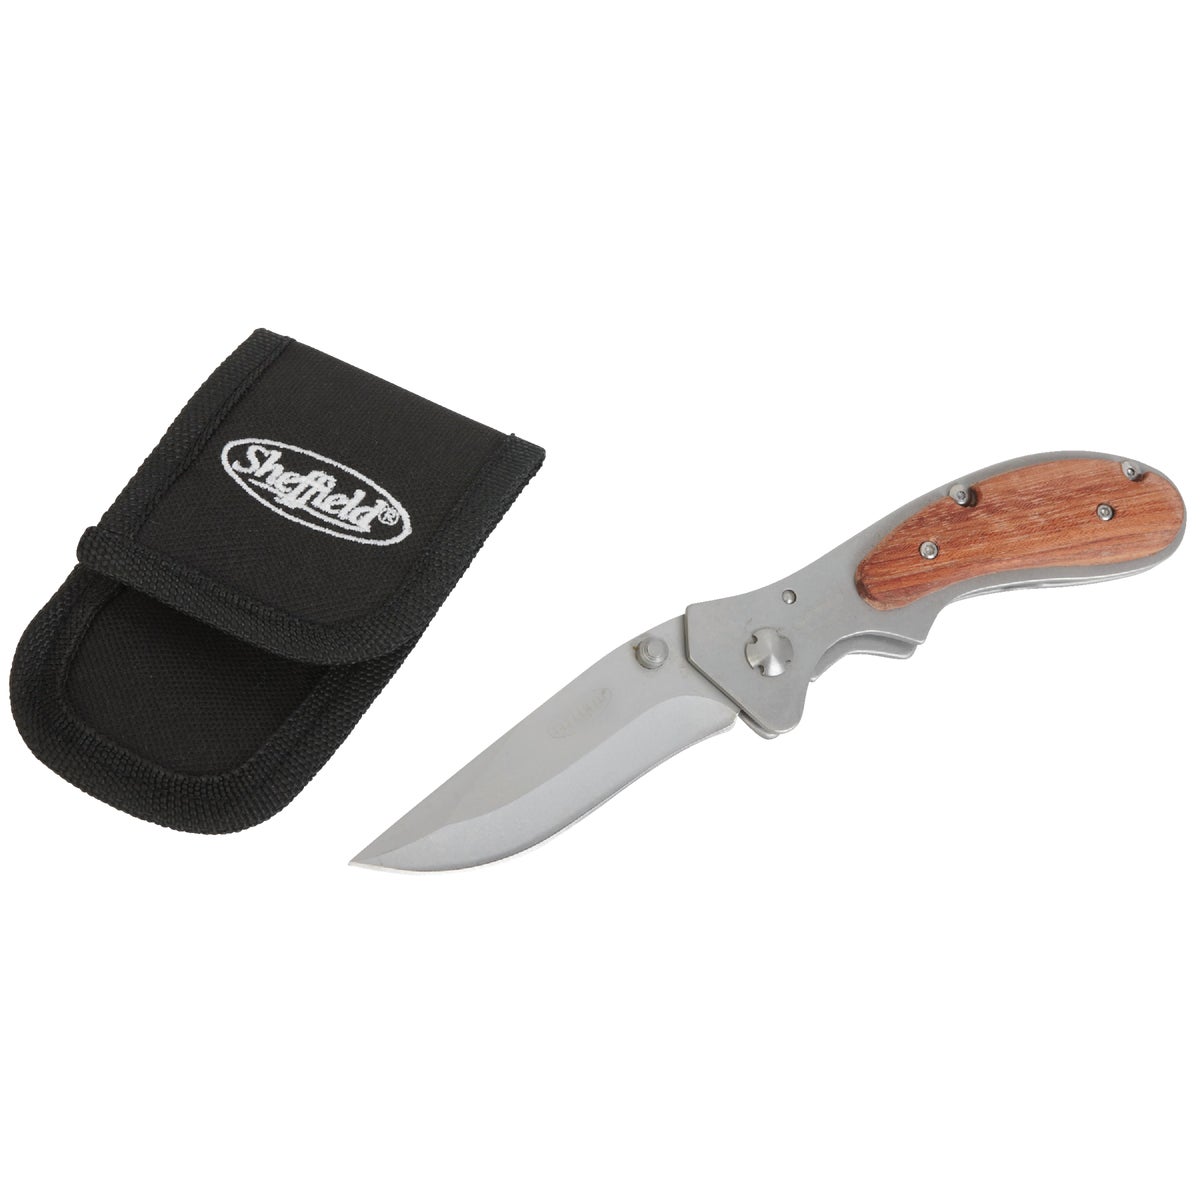 Item 814938, Boreal folding knife features a 3 In.